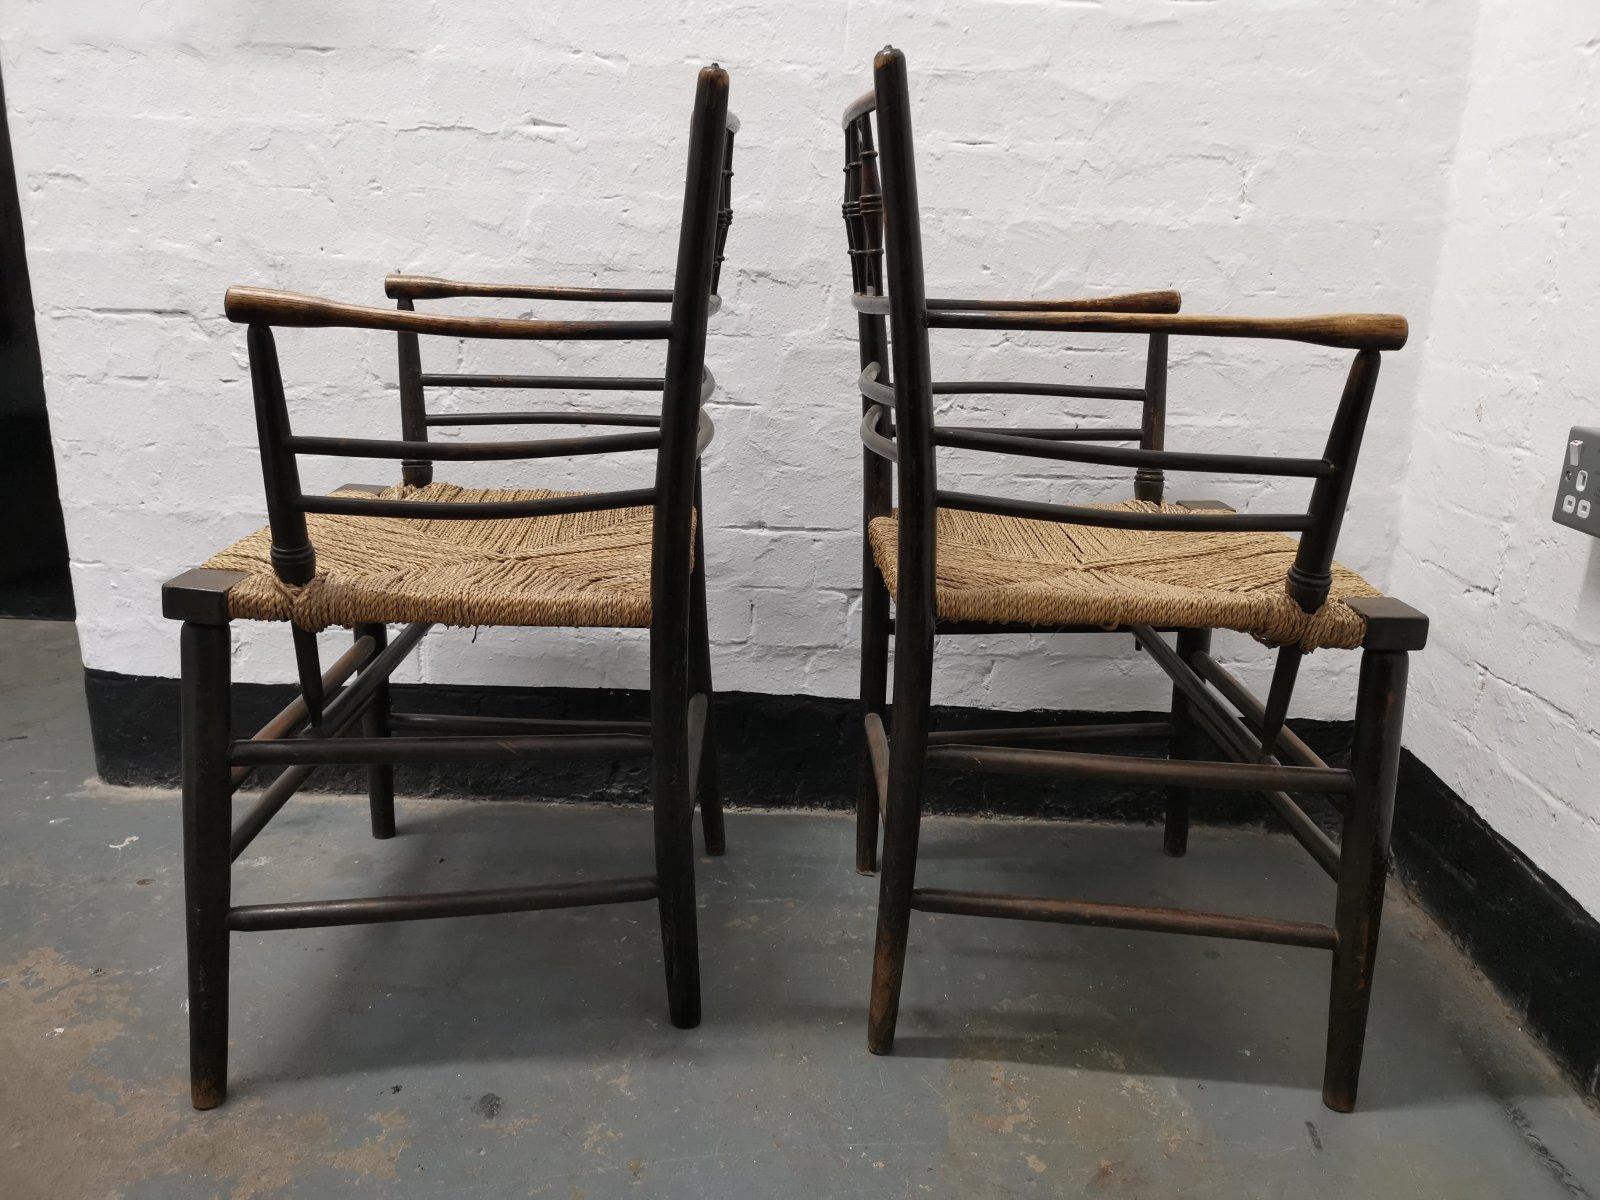 Philip Webb for Morris & Co. Sussex Range.
A classic pair of English Arts & Crafts ebonized armchairs with the original seagrass seats in great condition. 
These are a true pair, born together.

Quote : Of all the specific minor improvements in